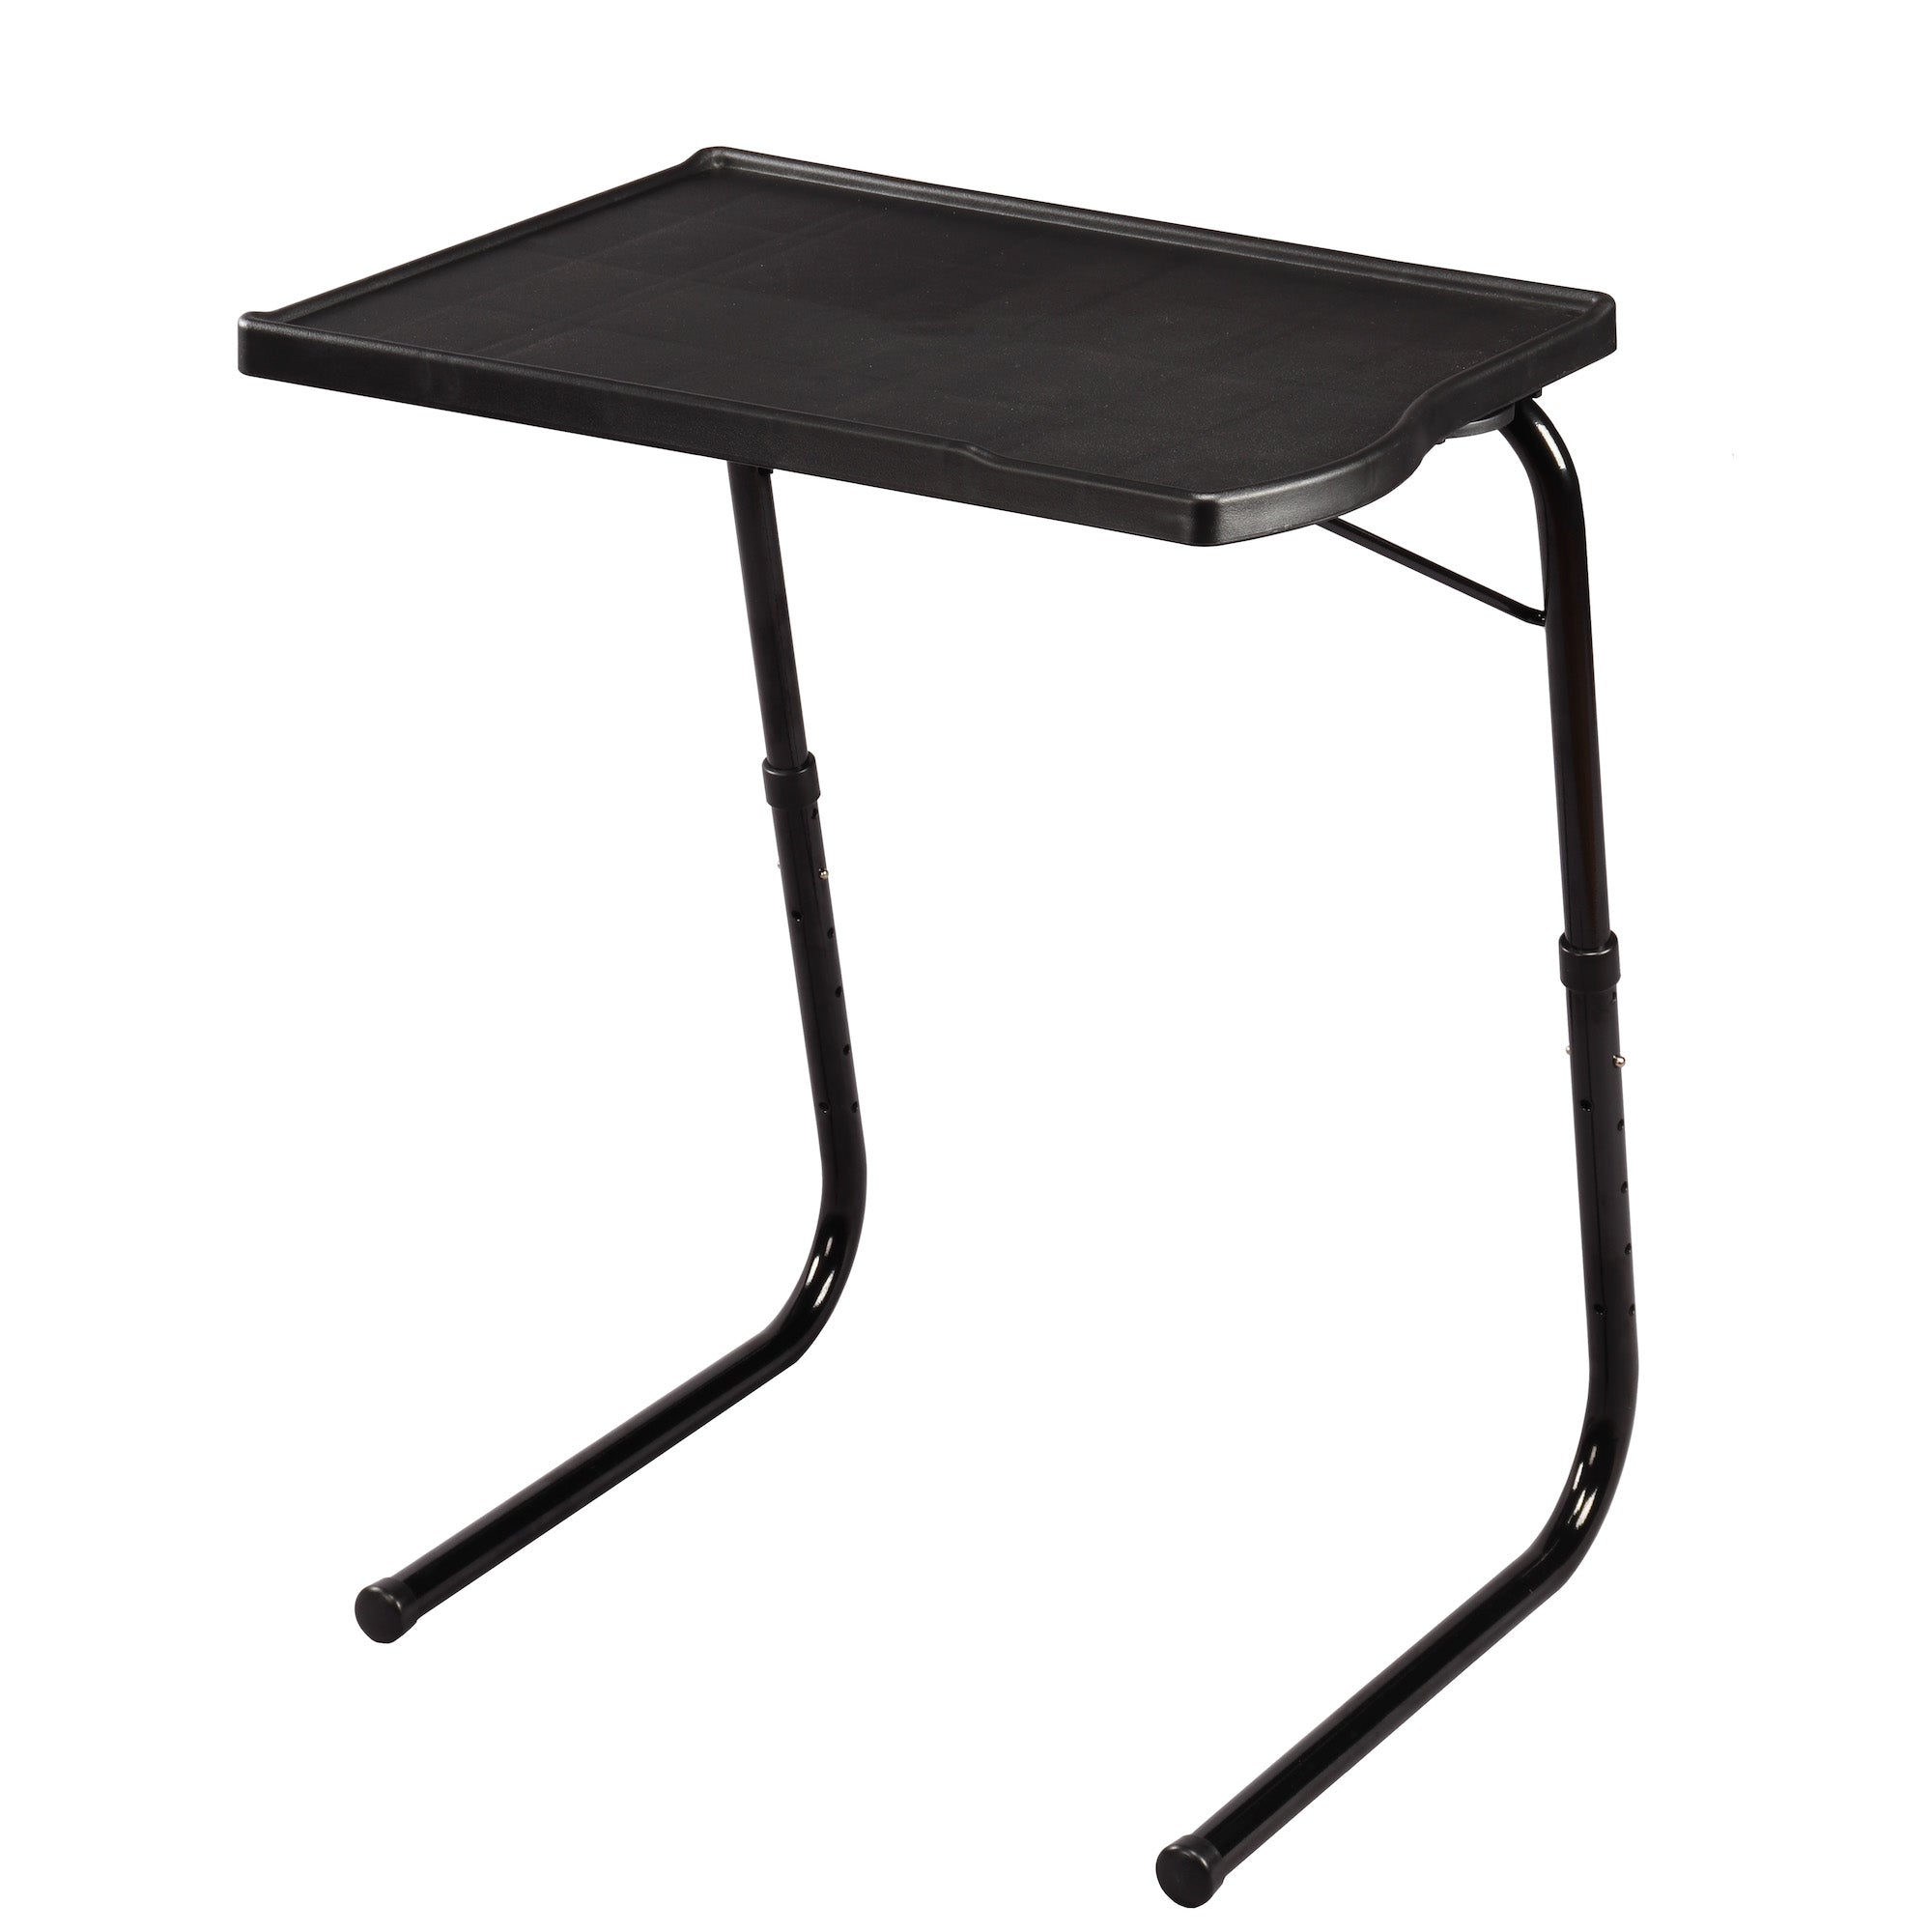 TABLE BUDDY smart ® | Folding Table With Cup Holder |Black